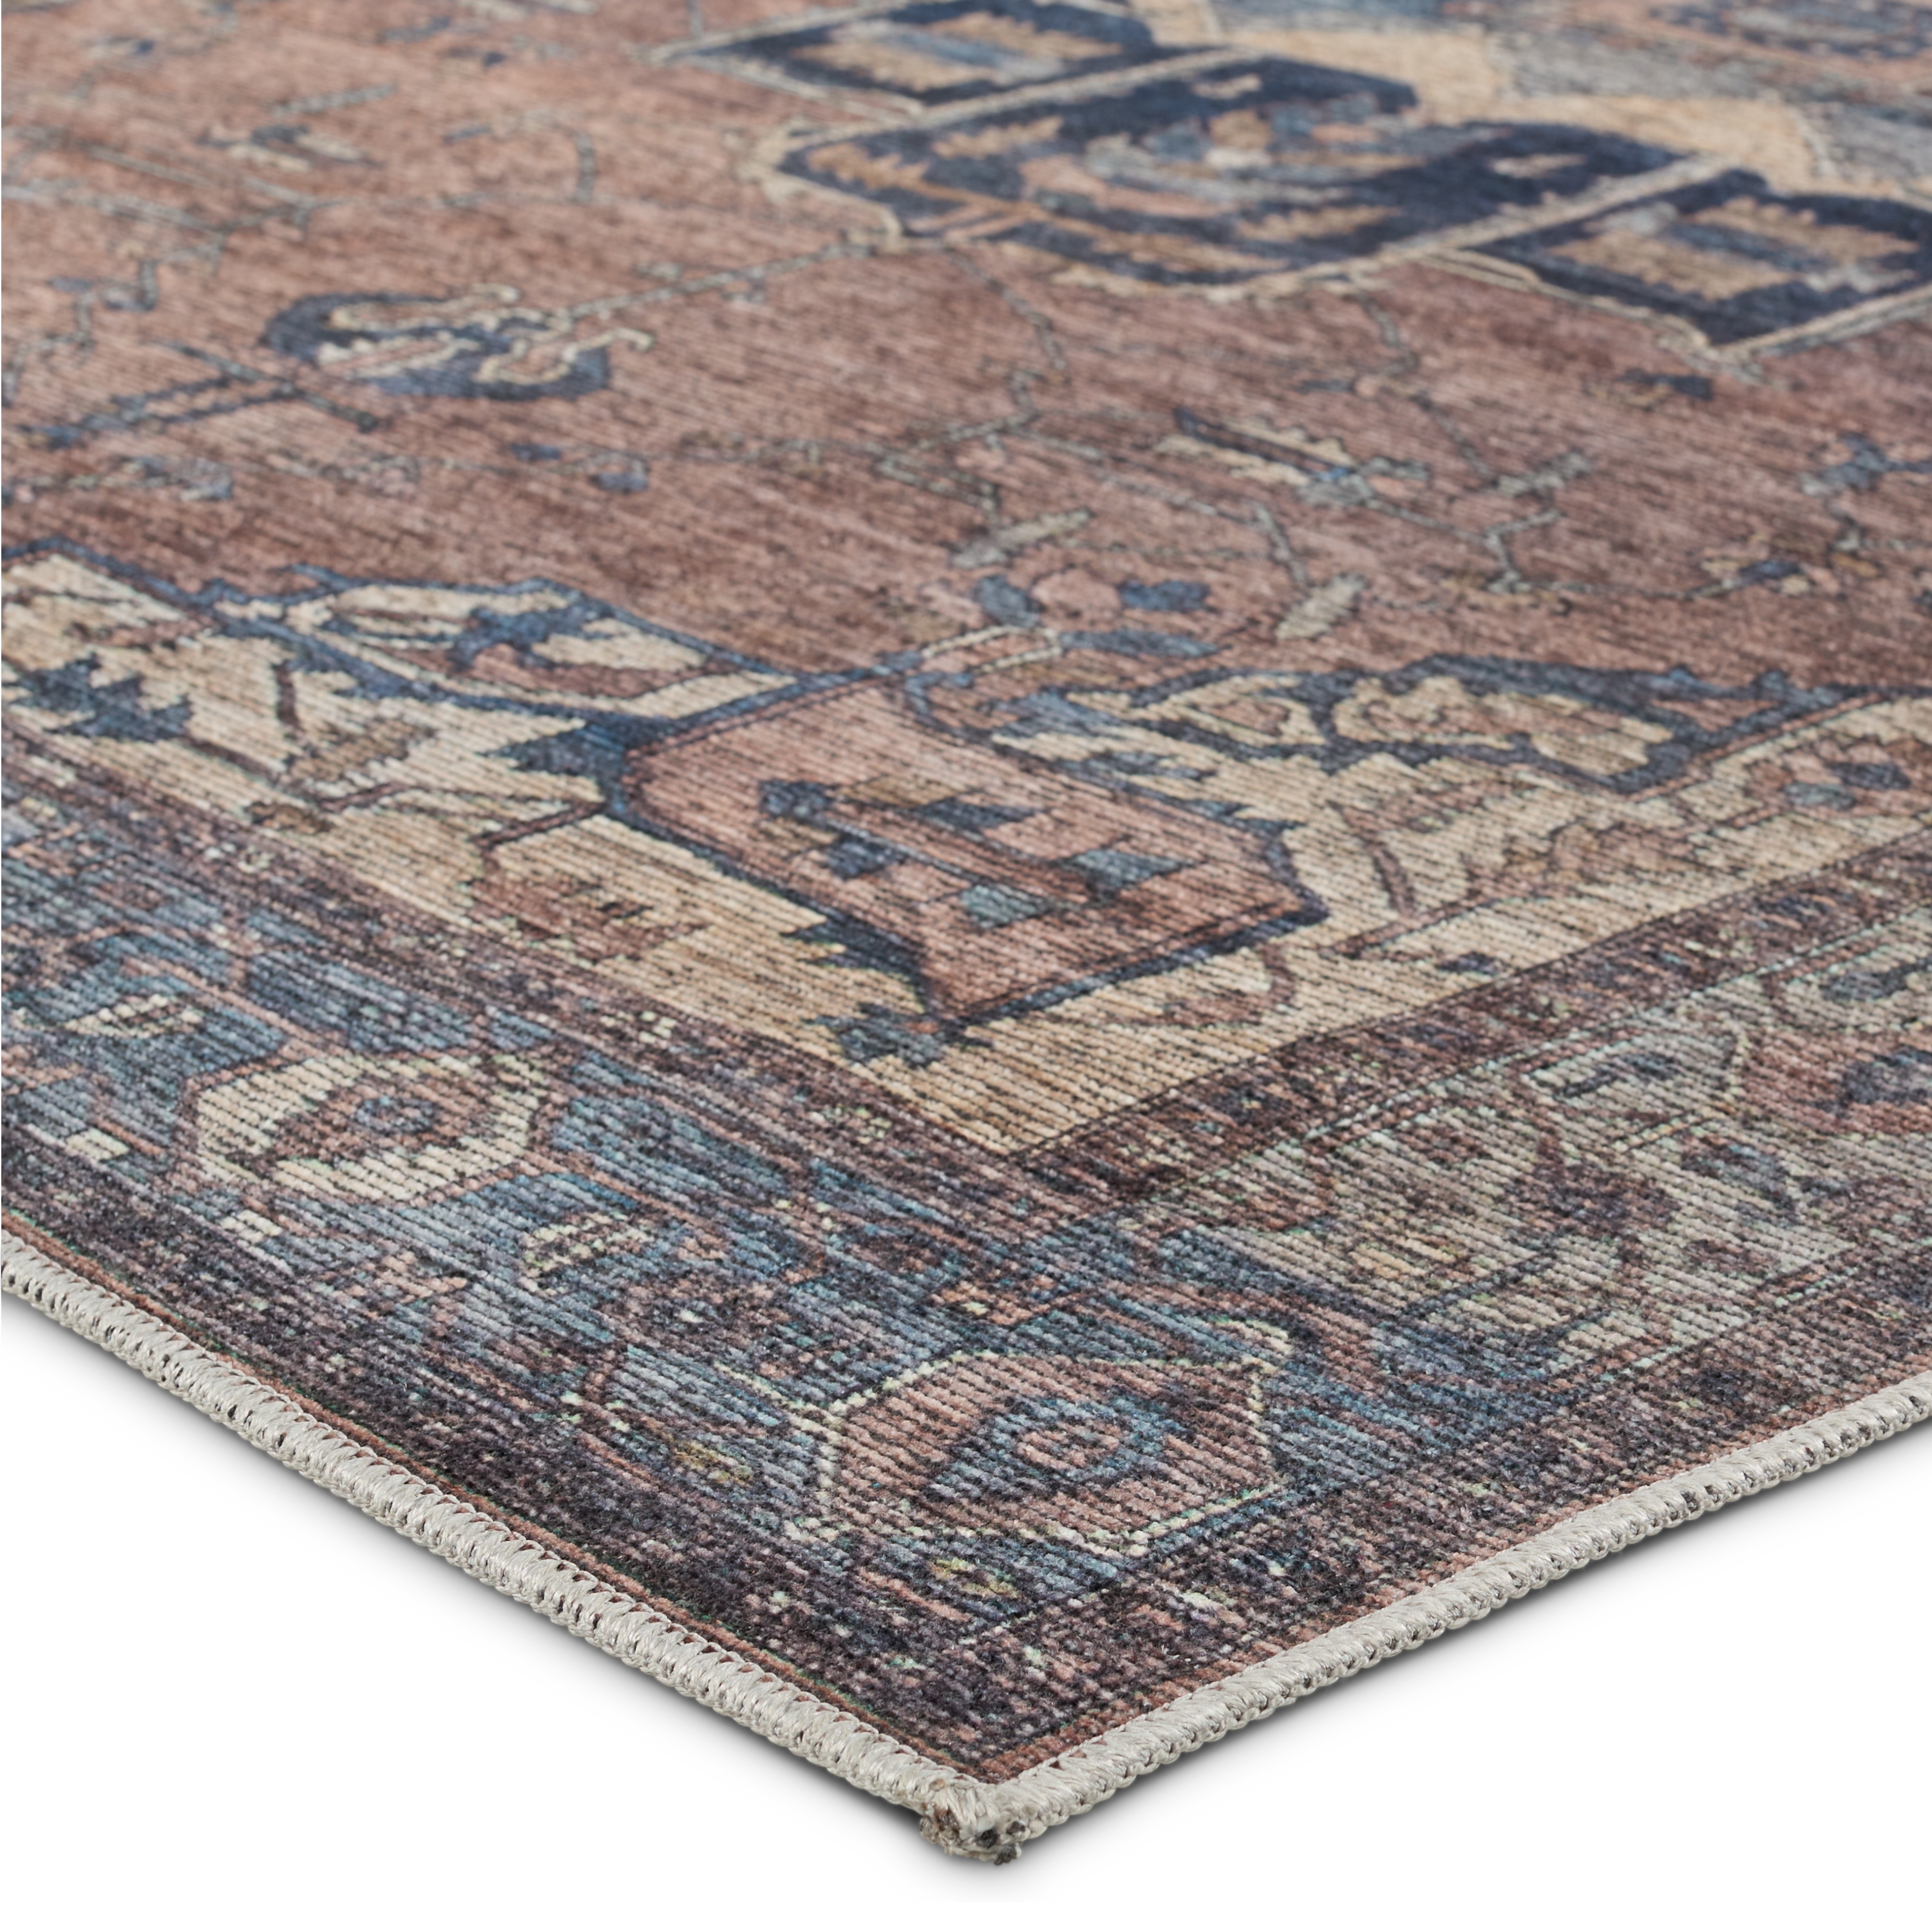 Vibe by Barrymore Medallion Blue/ Dark Brown Area Rug (10'6"X14') - Image 1